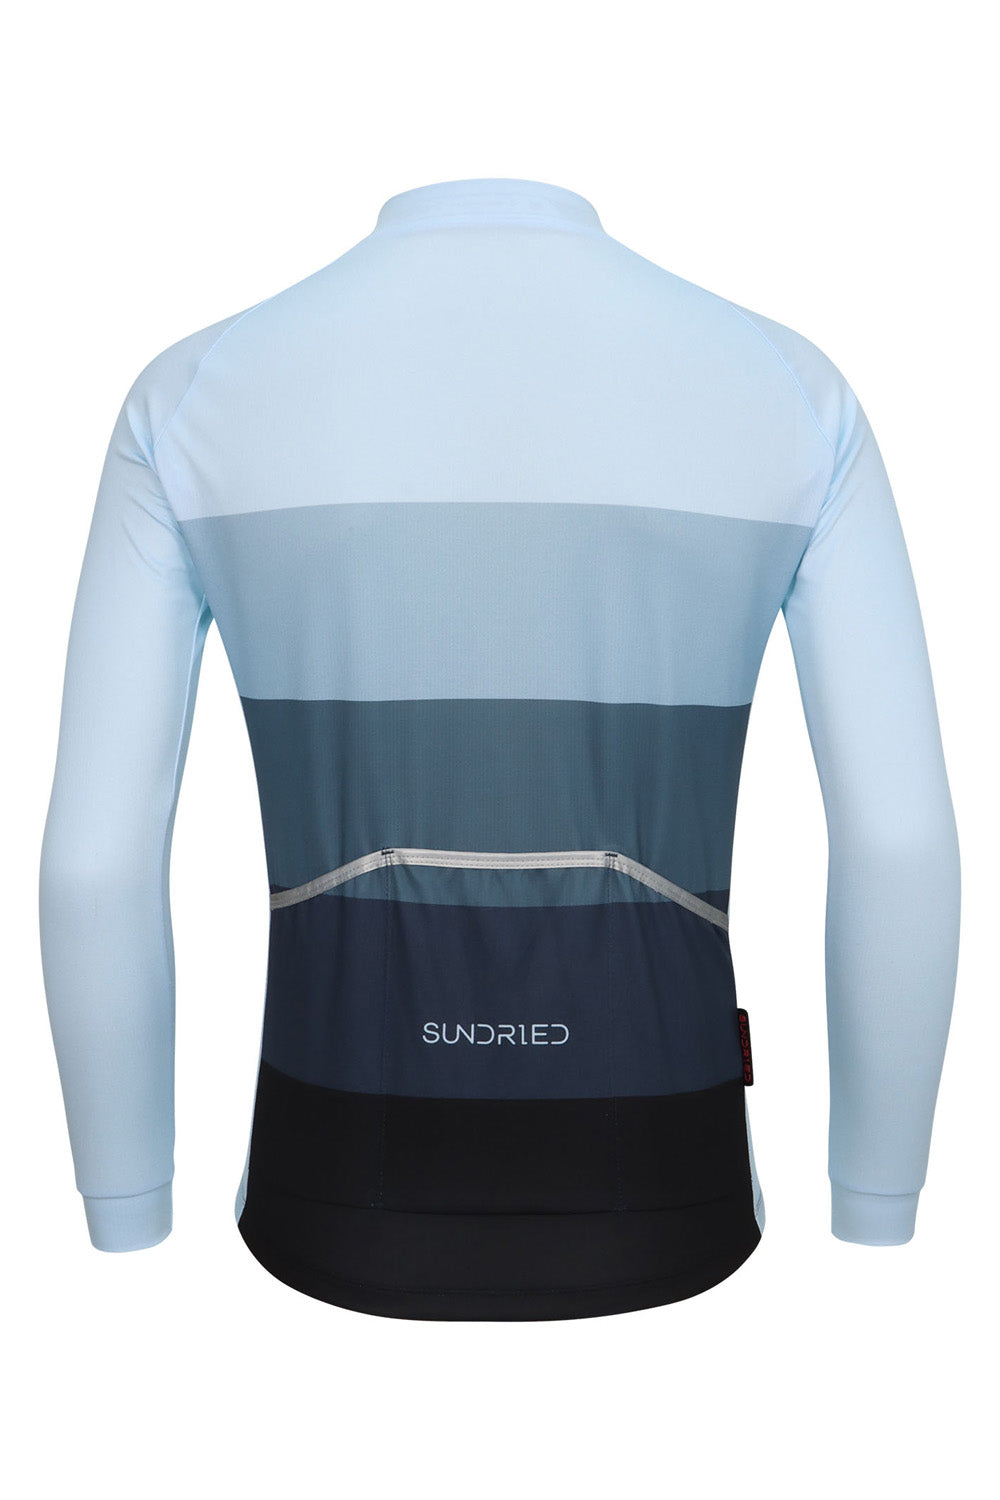 Sundried Ice Men's Long Sleeve Cycle Jersey Long Sleeve Jersey Activewear